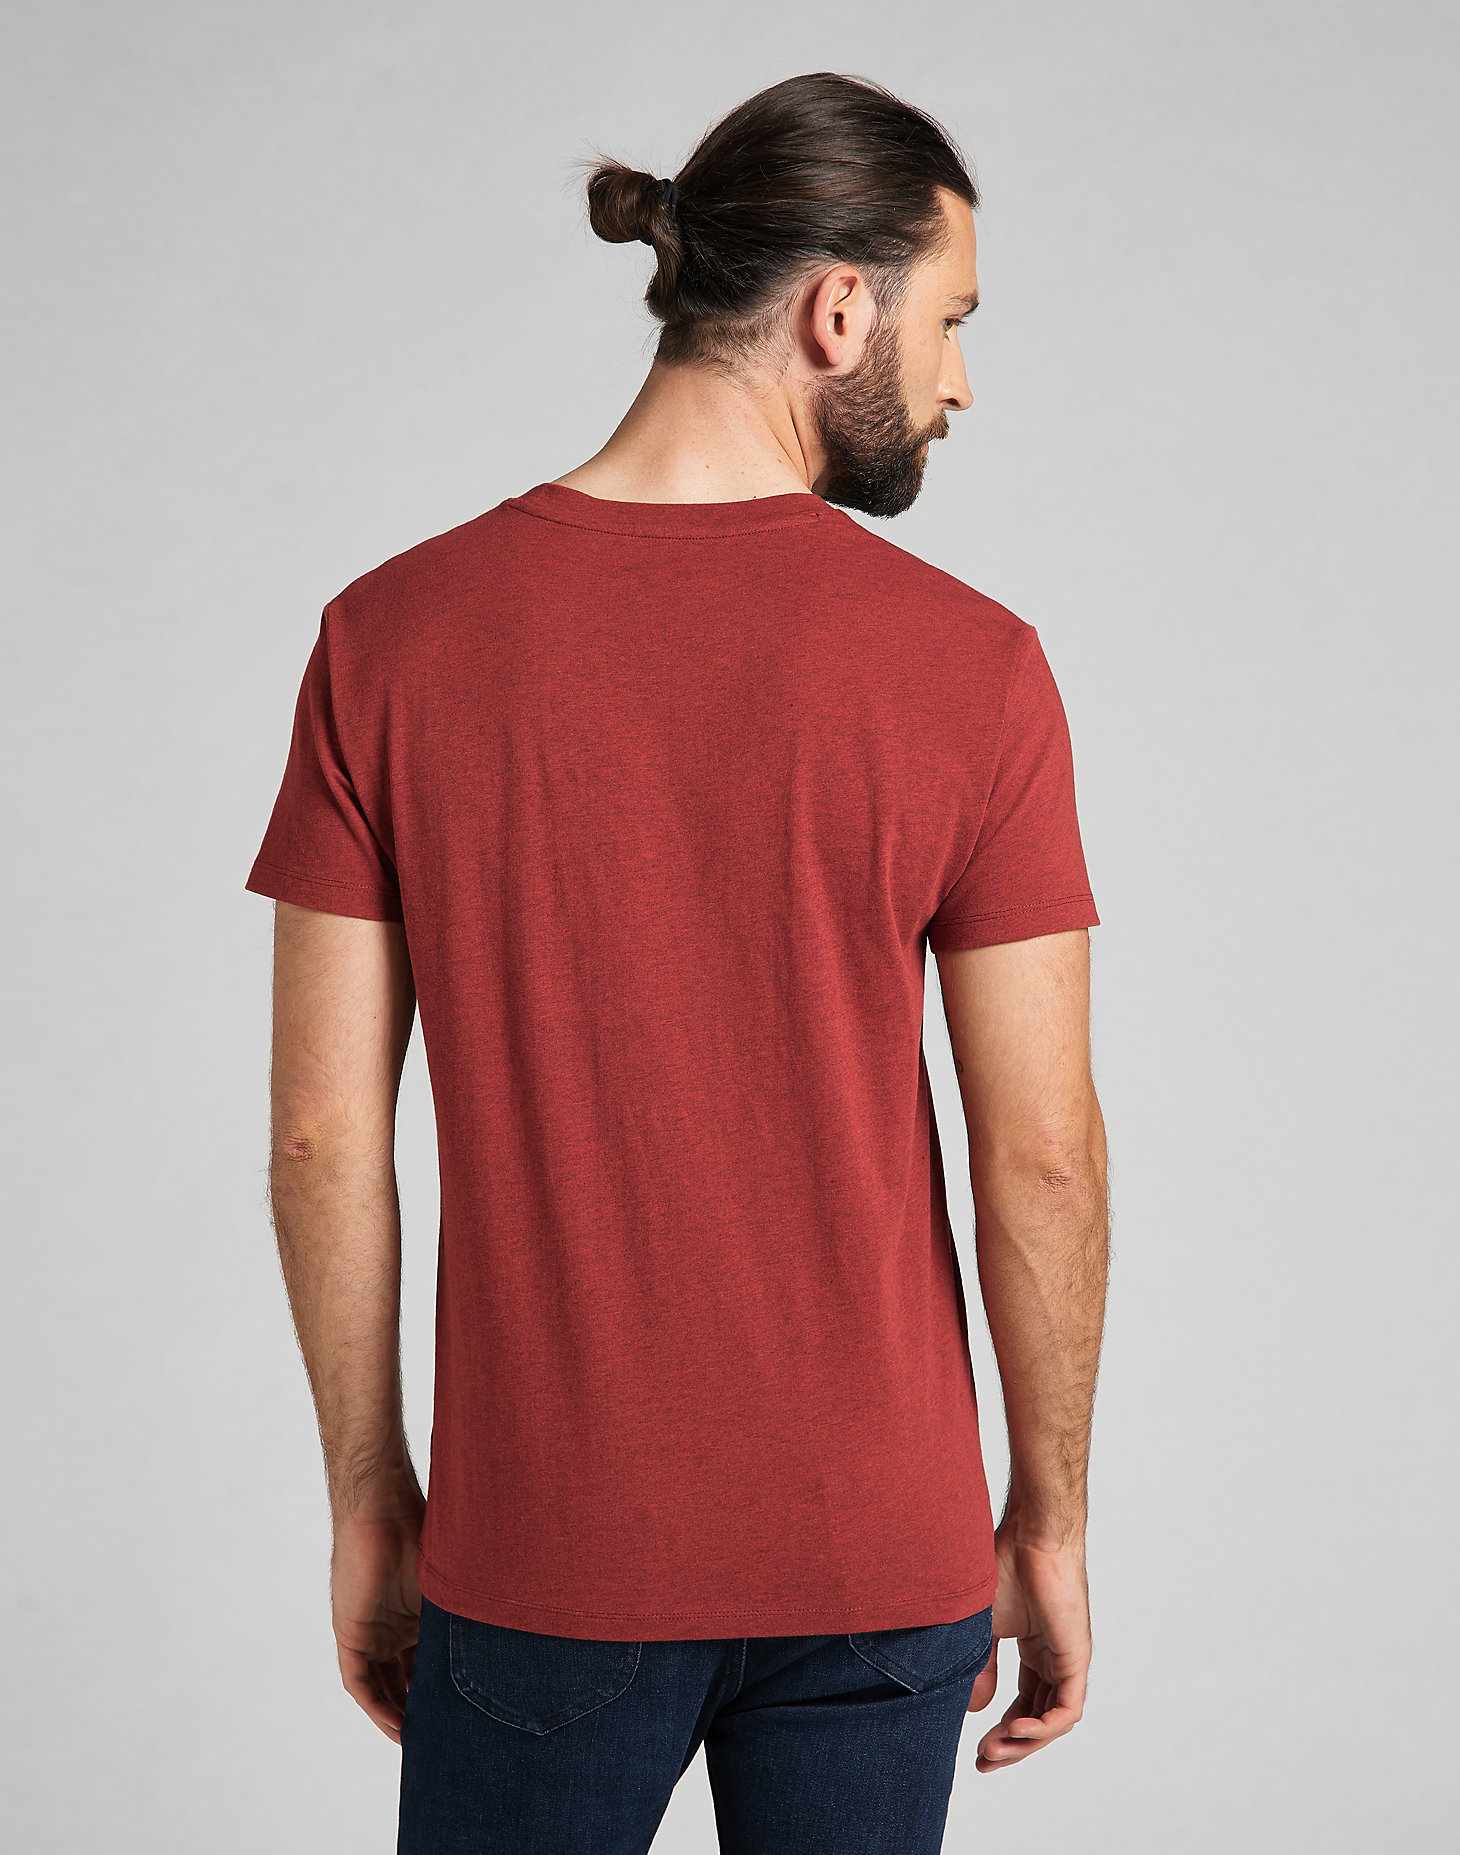 Ultimate Pocket Tee in Fired Brick alternative view 1